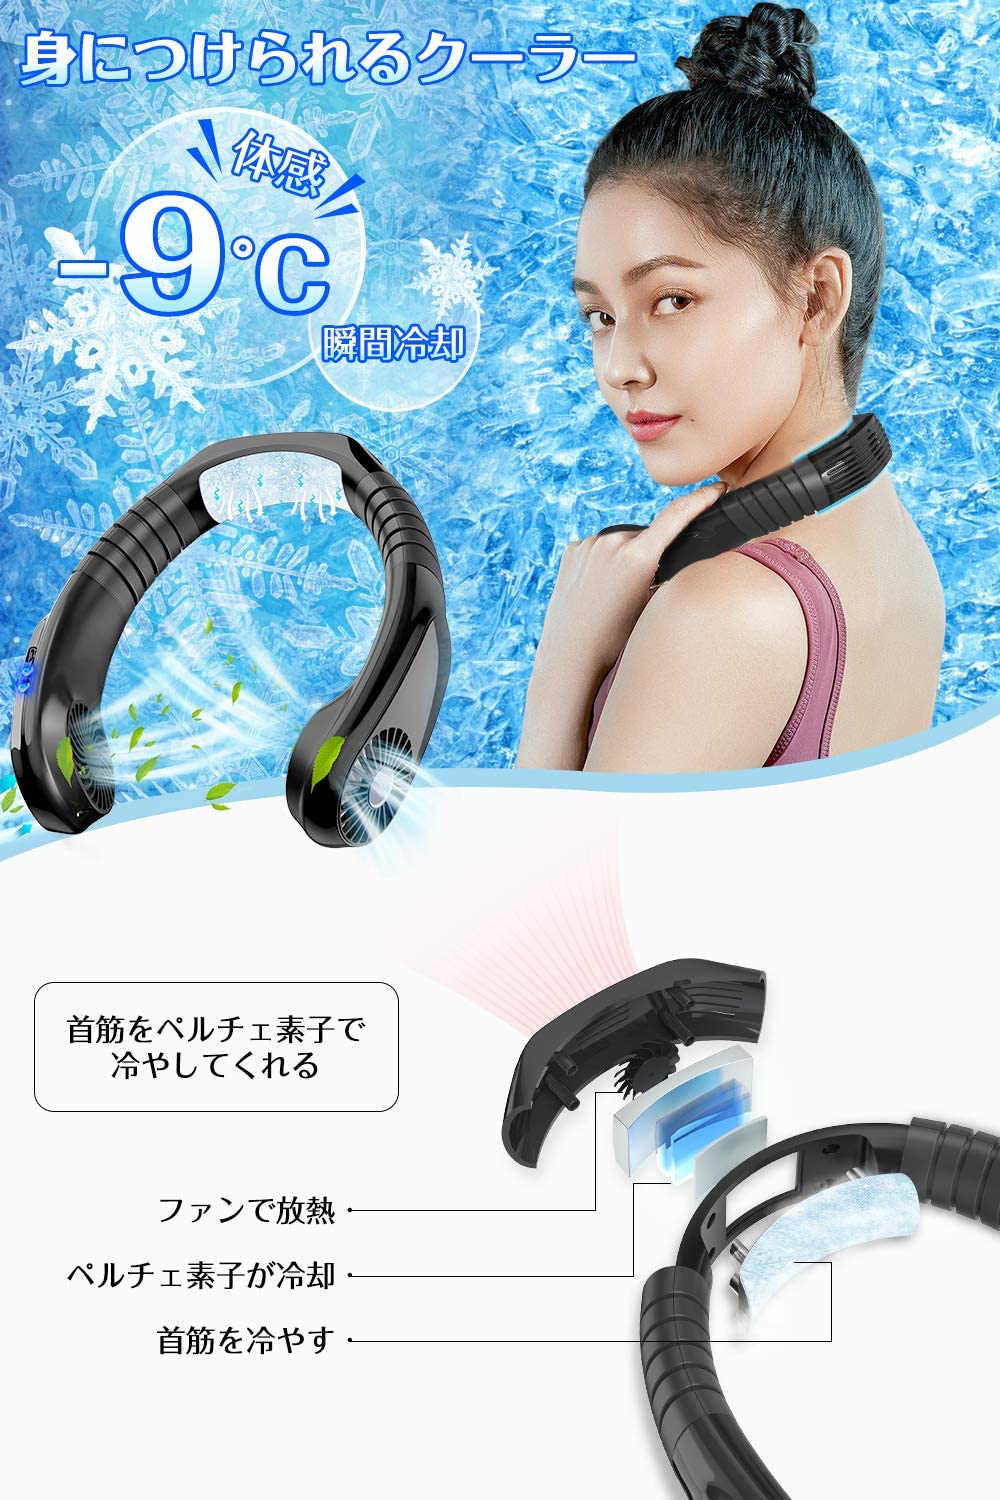 Beat the heat with this neck cooler - Japan Today